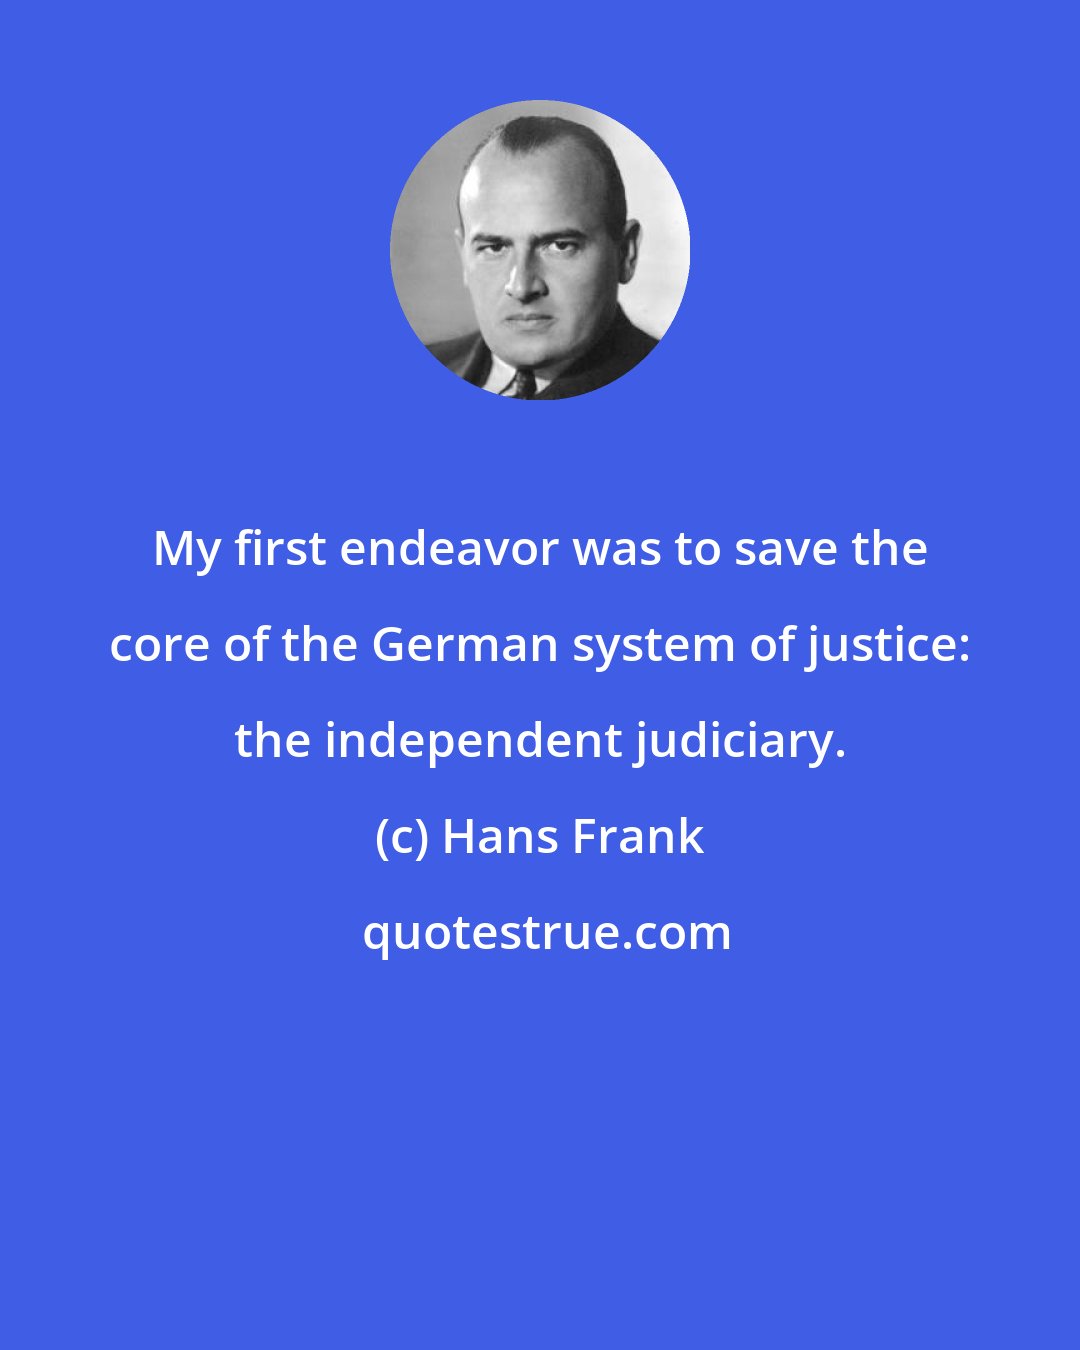 Hans Frank: My first endeavor was to save the core of the German system of justice: the independent judiciary.